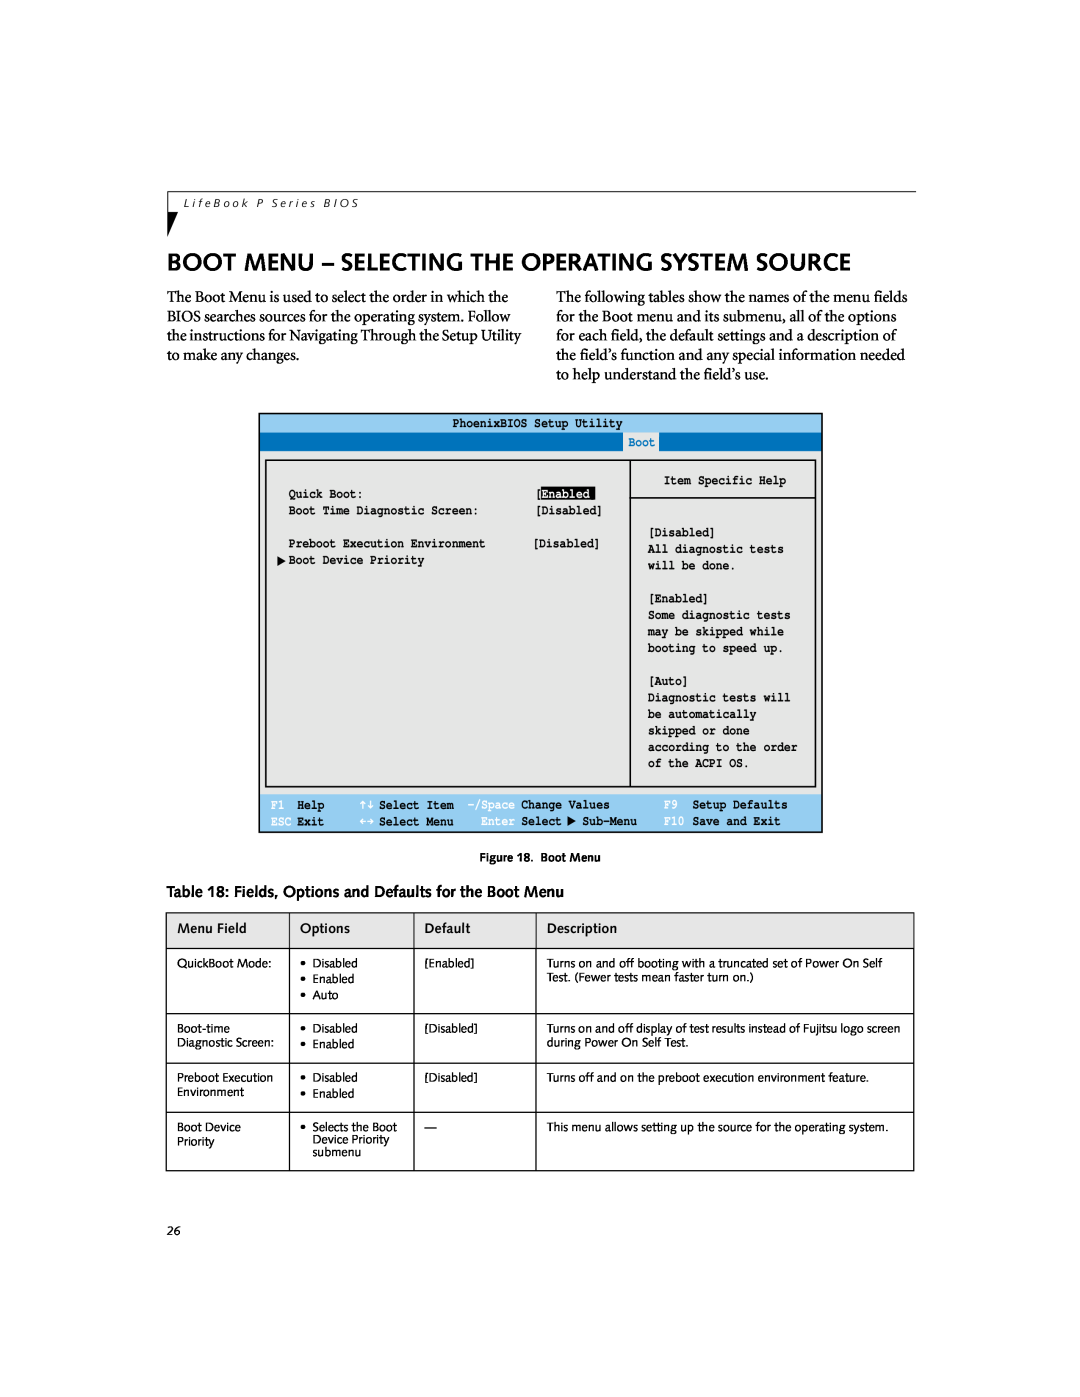 Fujitsu P-2046 manual Boot Menu - Selecting The Operating System Source, Fields, Options and Defaults for the Boot Menu 